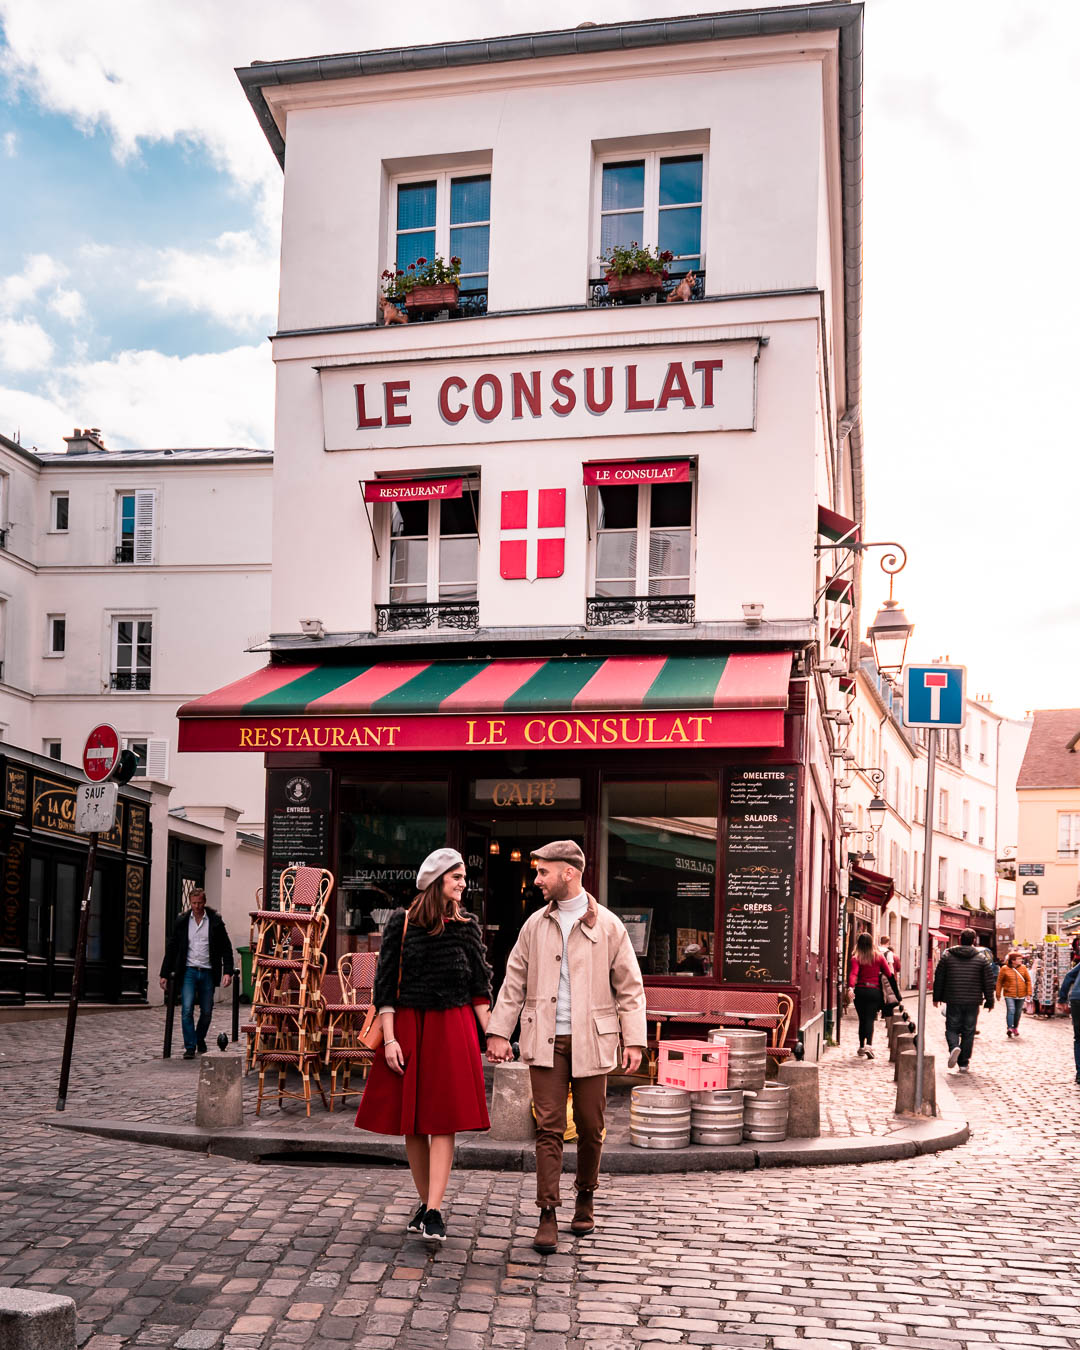 10 Photos That Will Inspire You to Visit Paris After Covid 19